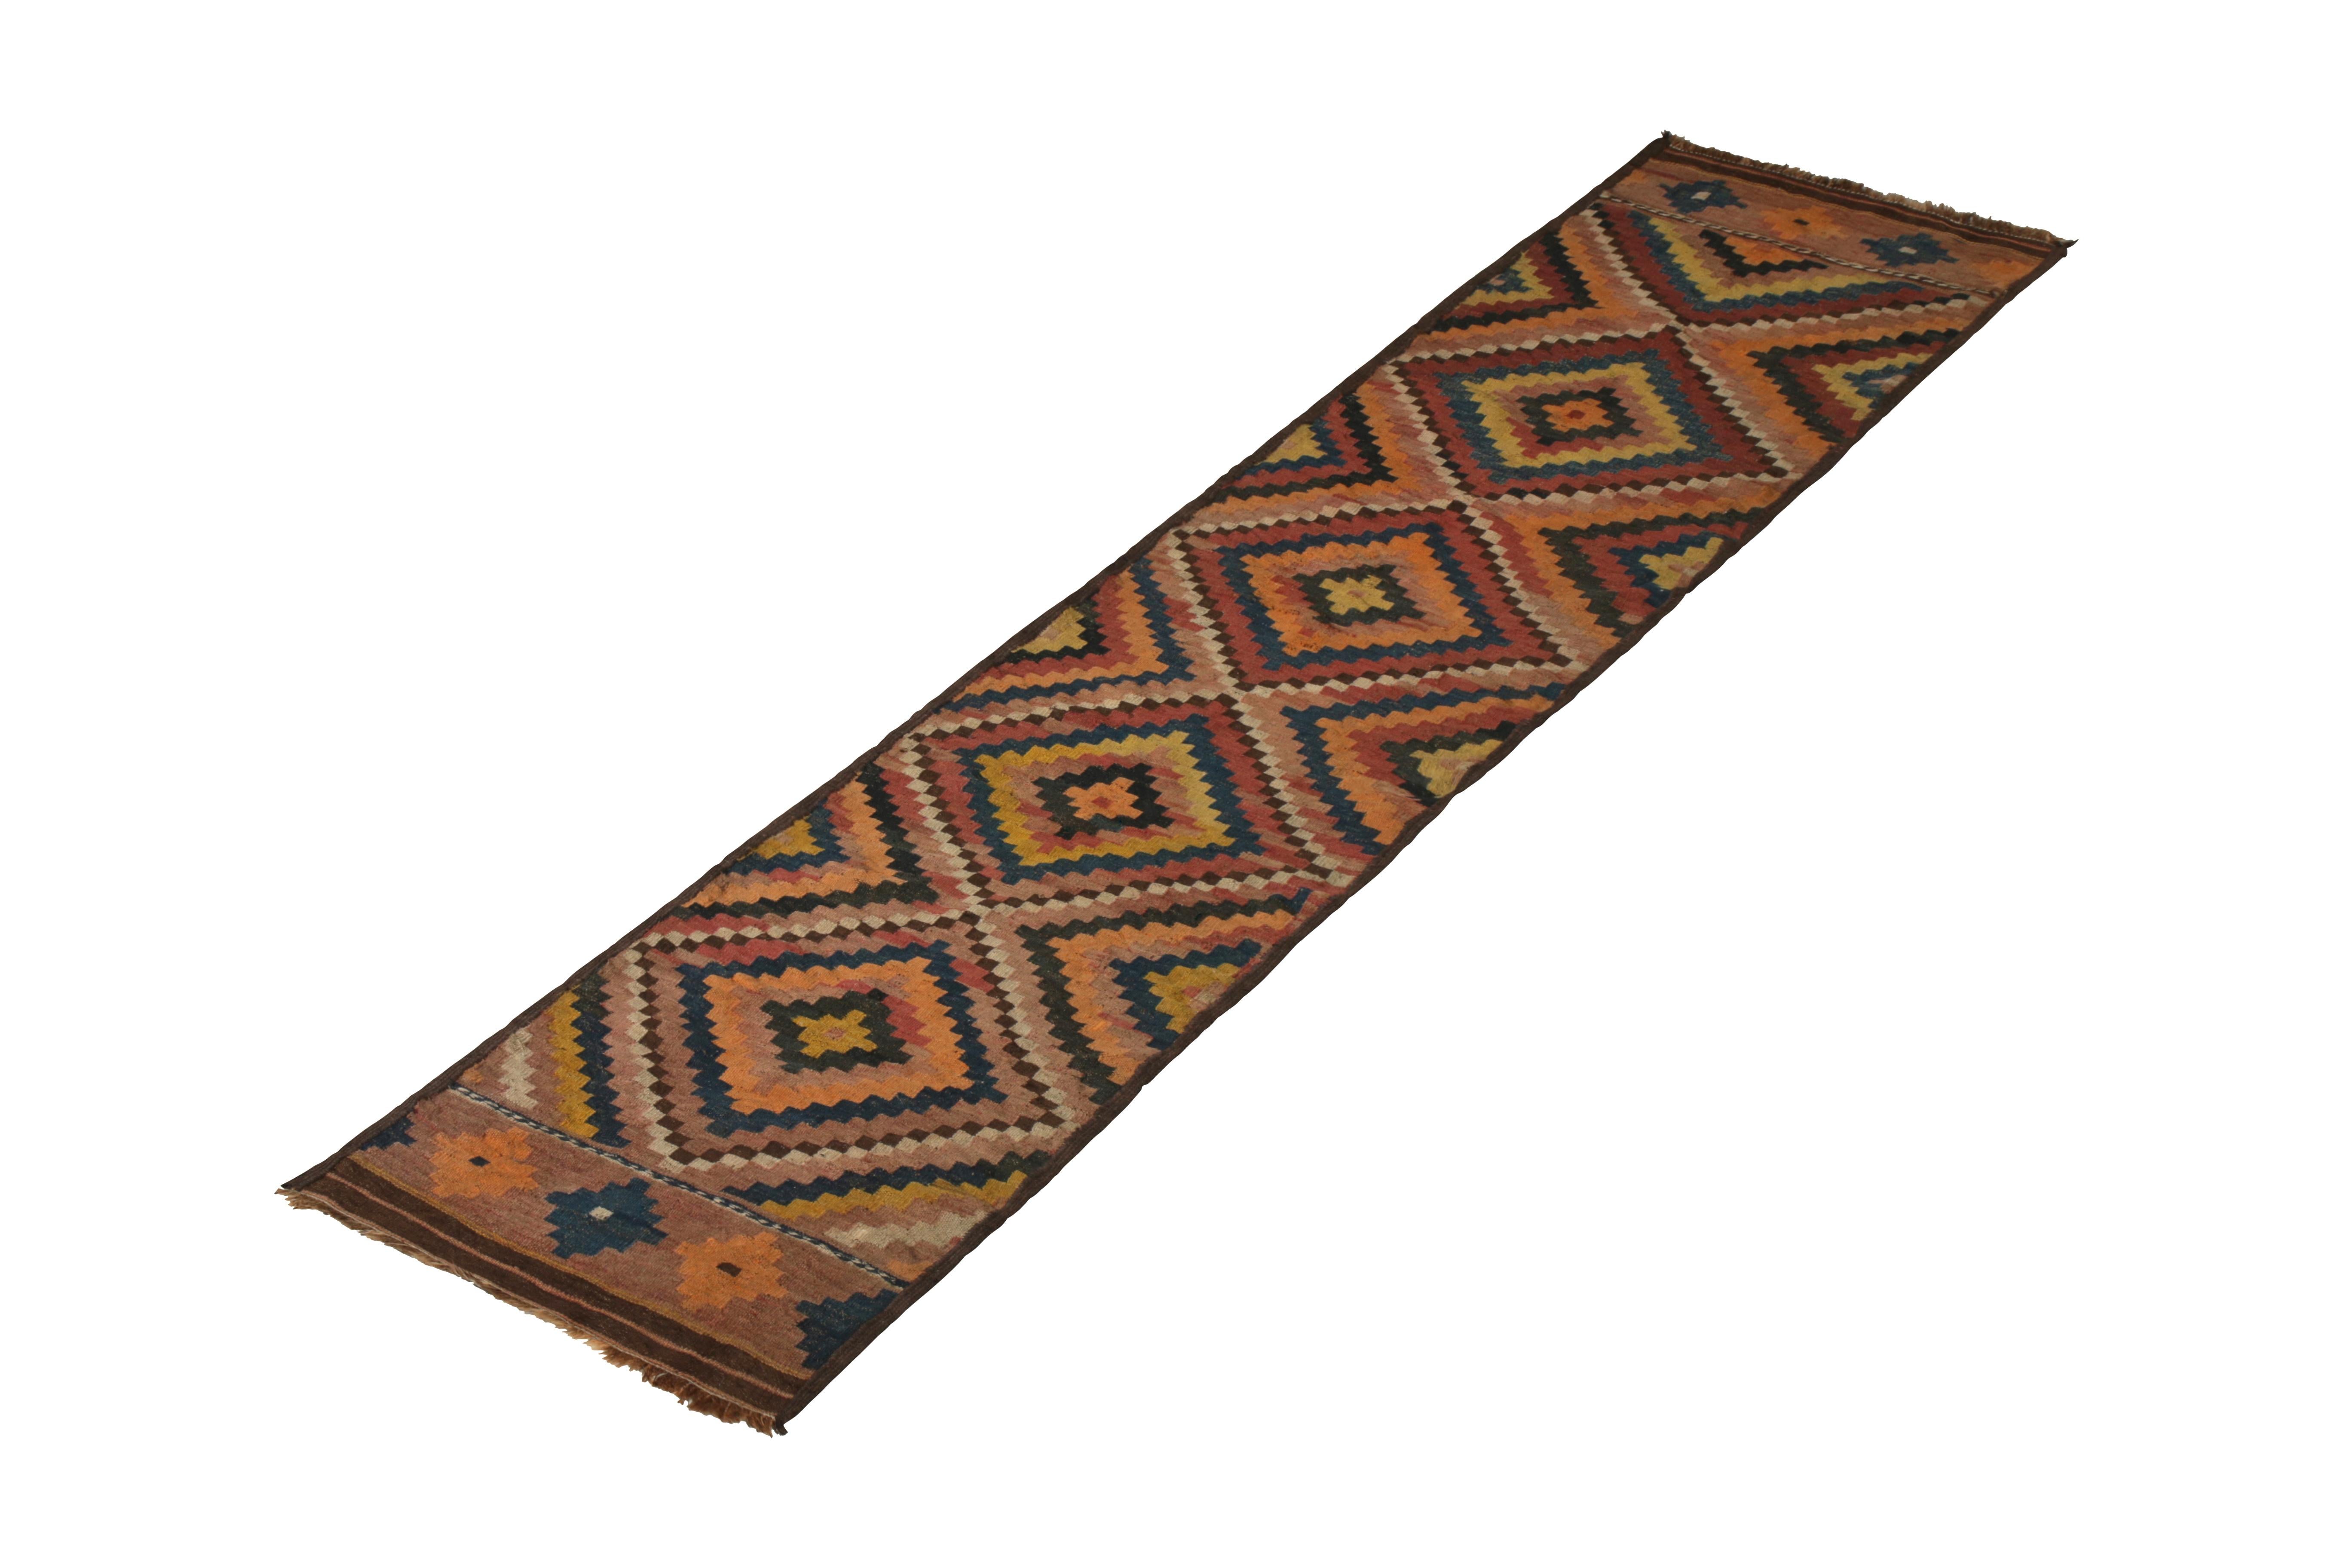 Flat-woven in wool originating circa 1950-1960, this vintage Kilim runner connotes a midcentury Afghan rug design borrowing heavily from celebrated tribal themes, including a bold diamond pattern in complementary orange, red, yellow, beige brown and